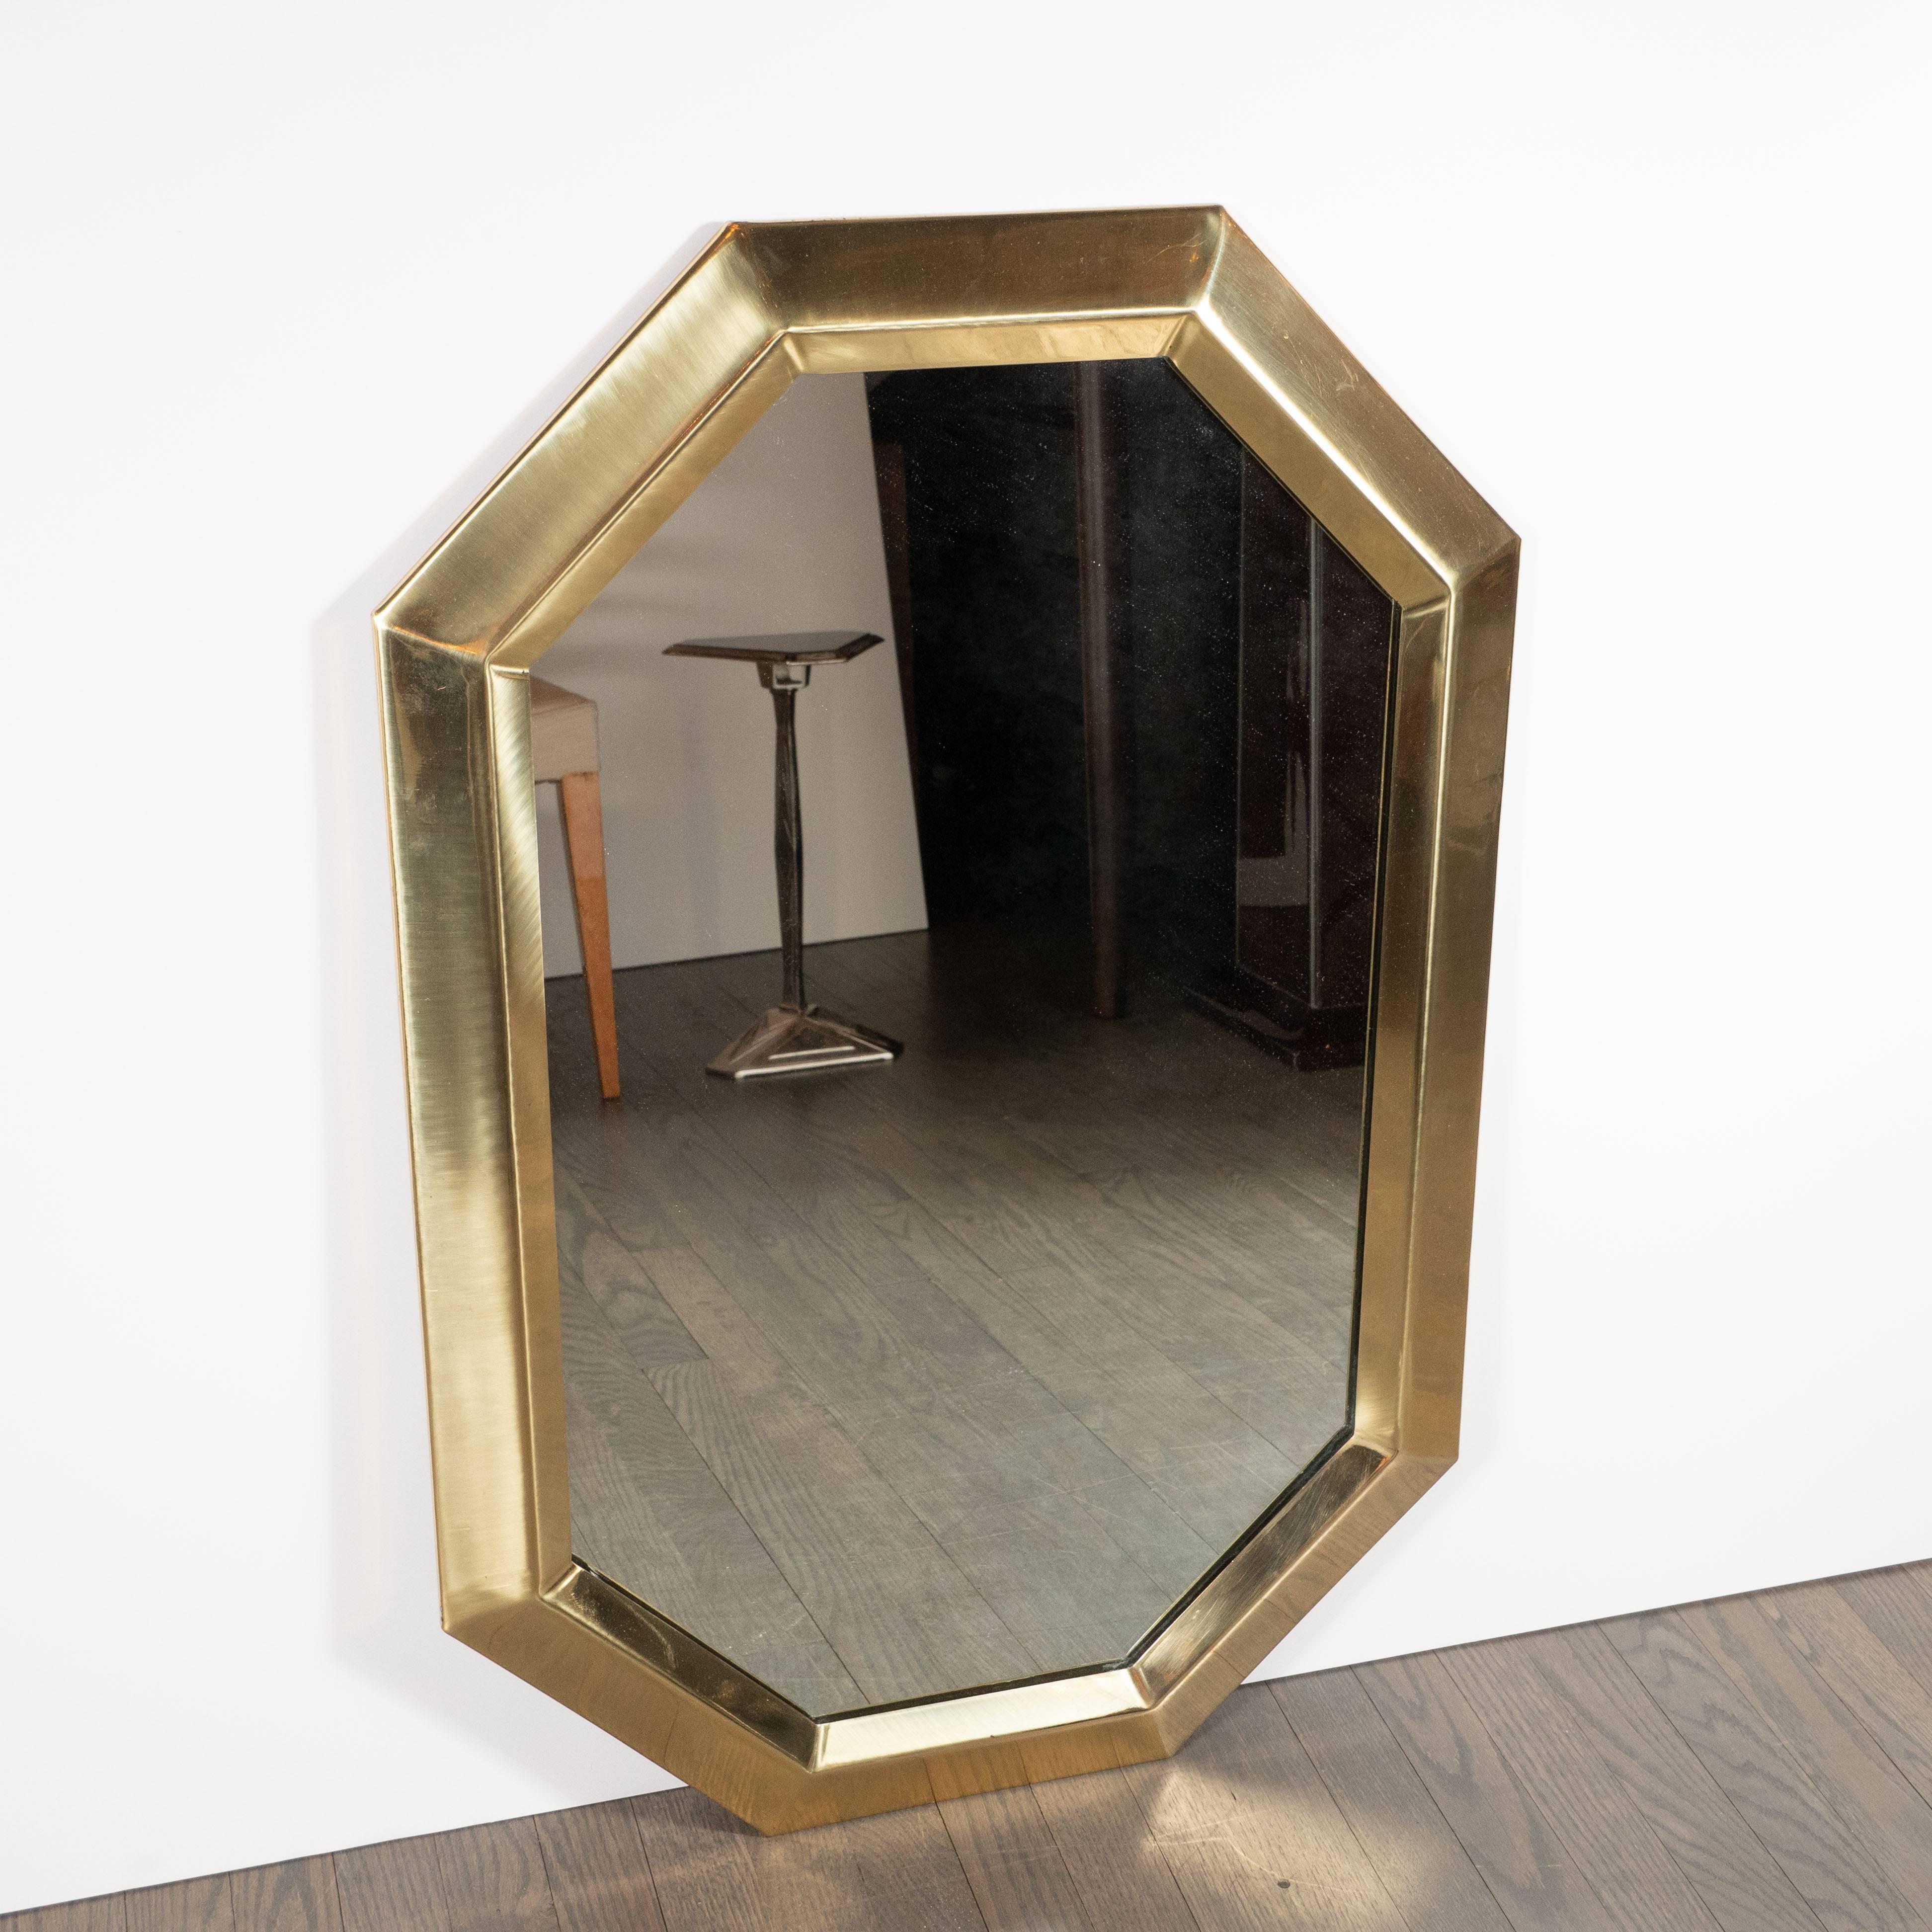 This elegant mirror was realized in the United States, circa 1970. It features an elongated octagonal brass body with raised edges, lending the piece a sculptural presence full of interesting angles and geometric forms. With its clean lines and